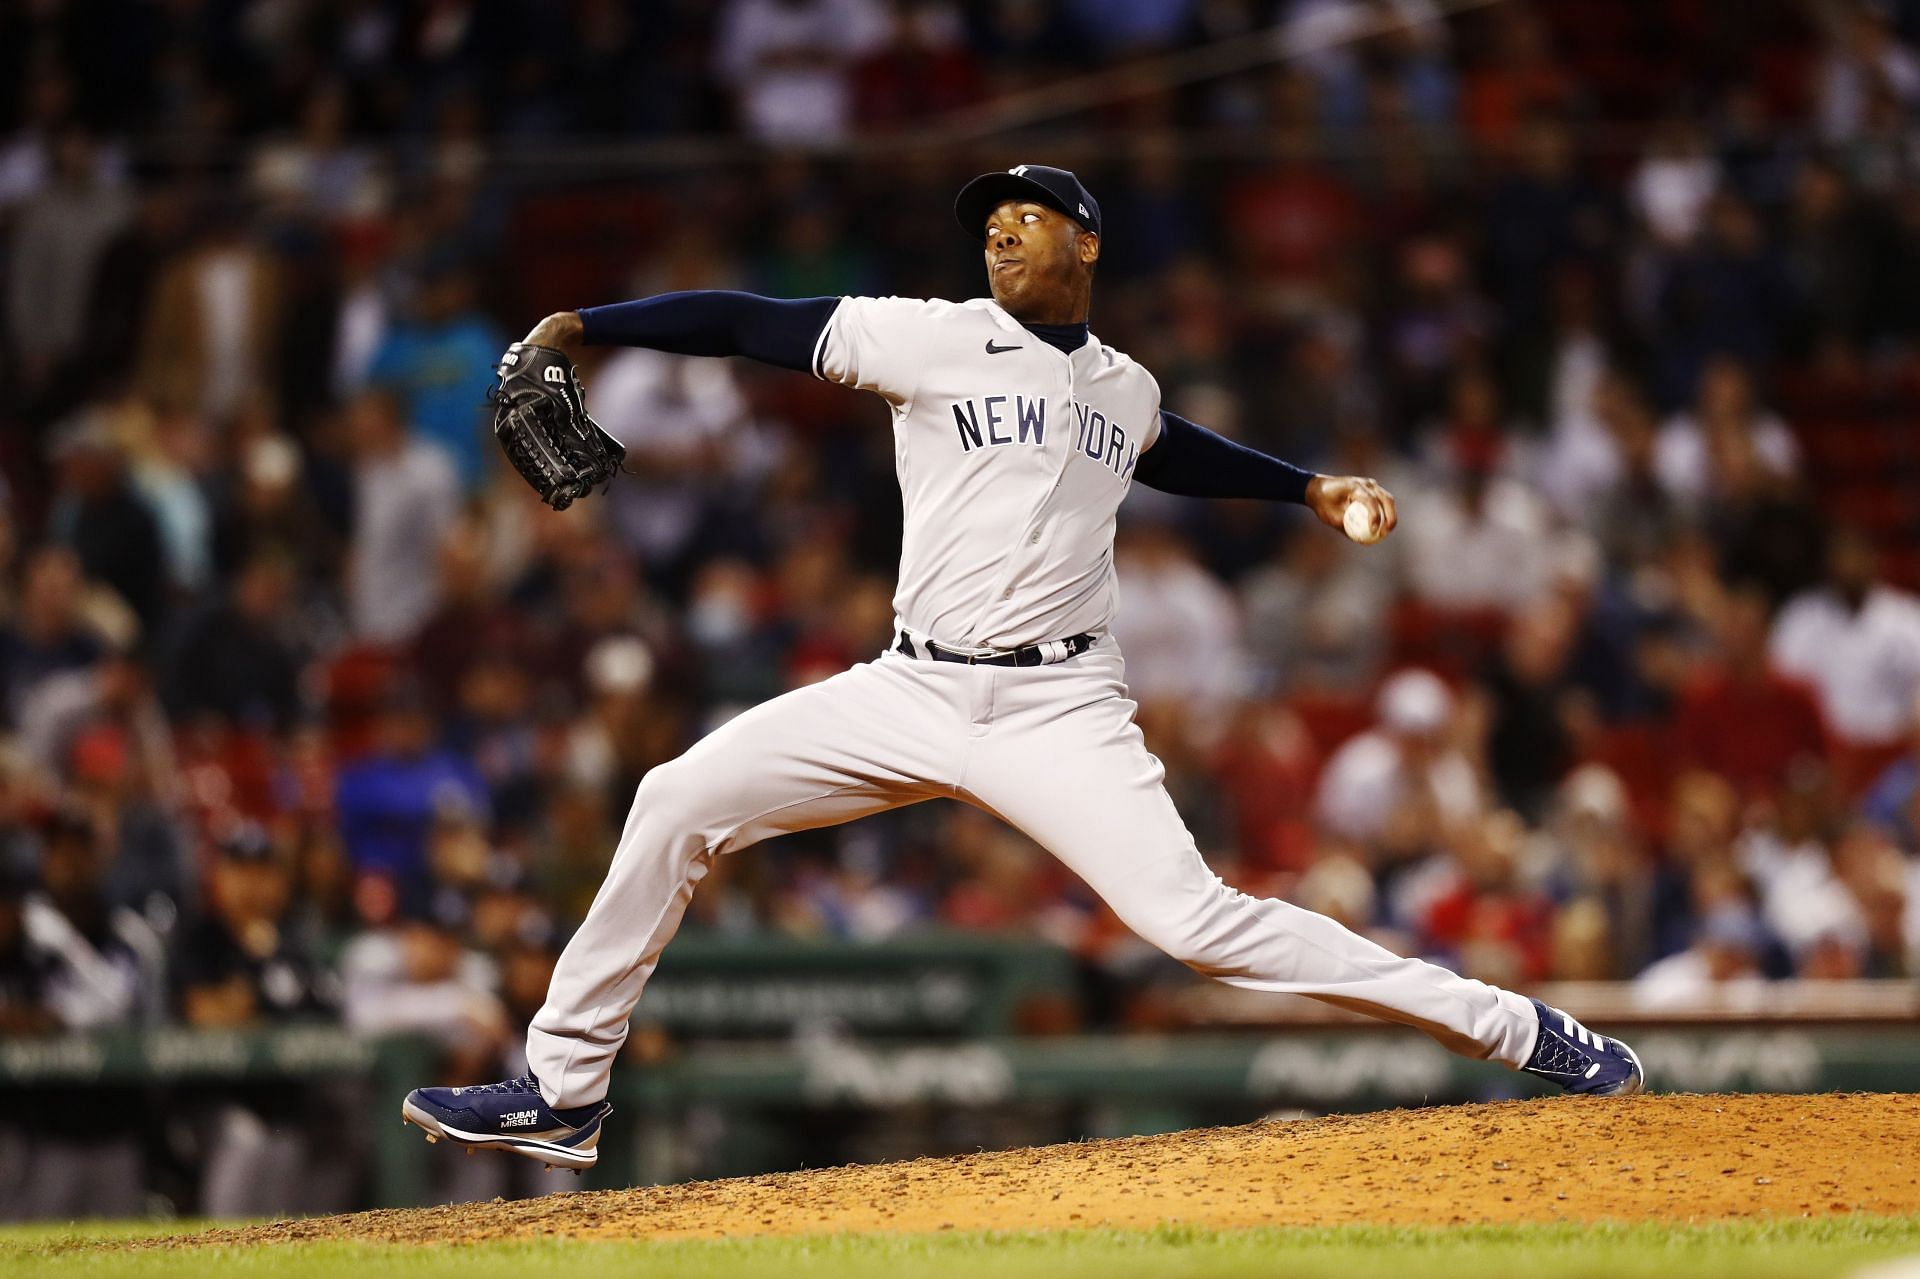 Ranking MLB top closers going into the 2022 season